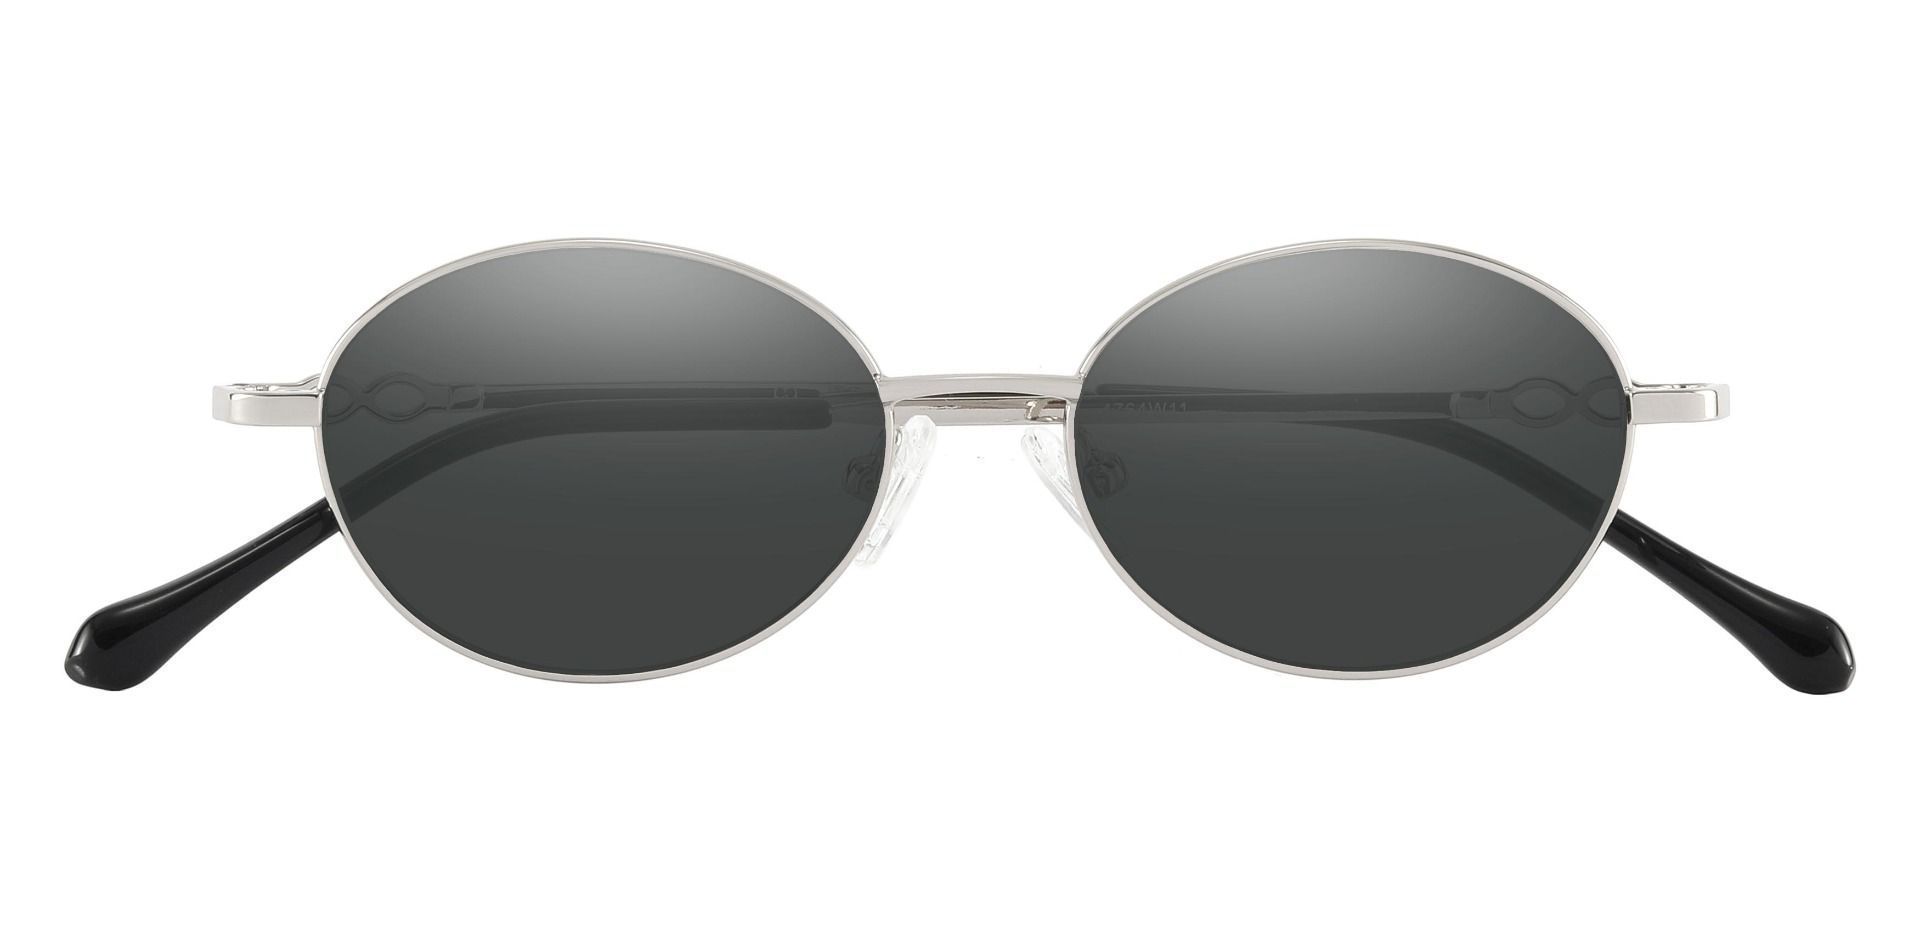 Odyssey Oval Lined Bifocal Sunglasses - Silver Frame With Gray Lenses